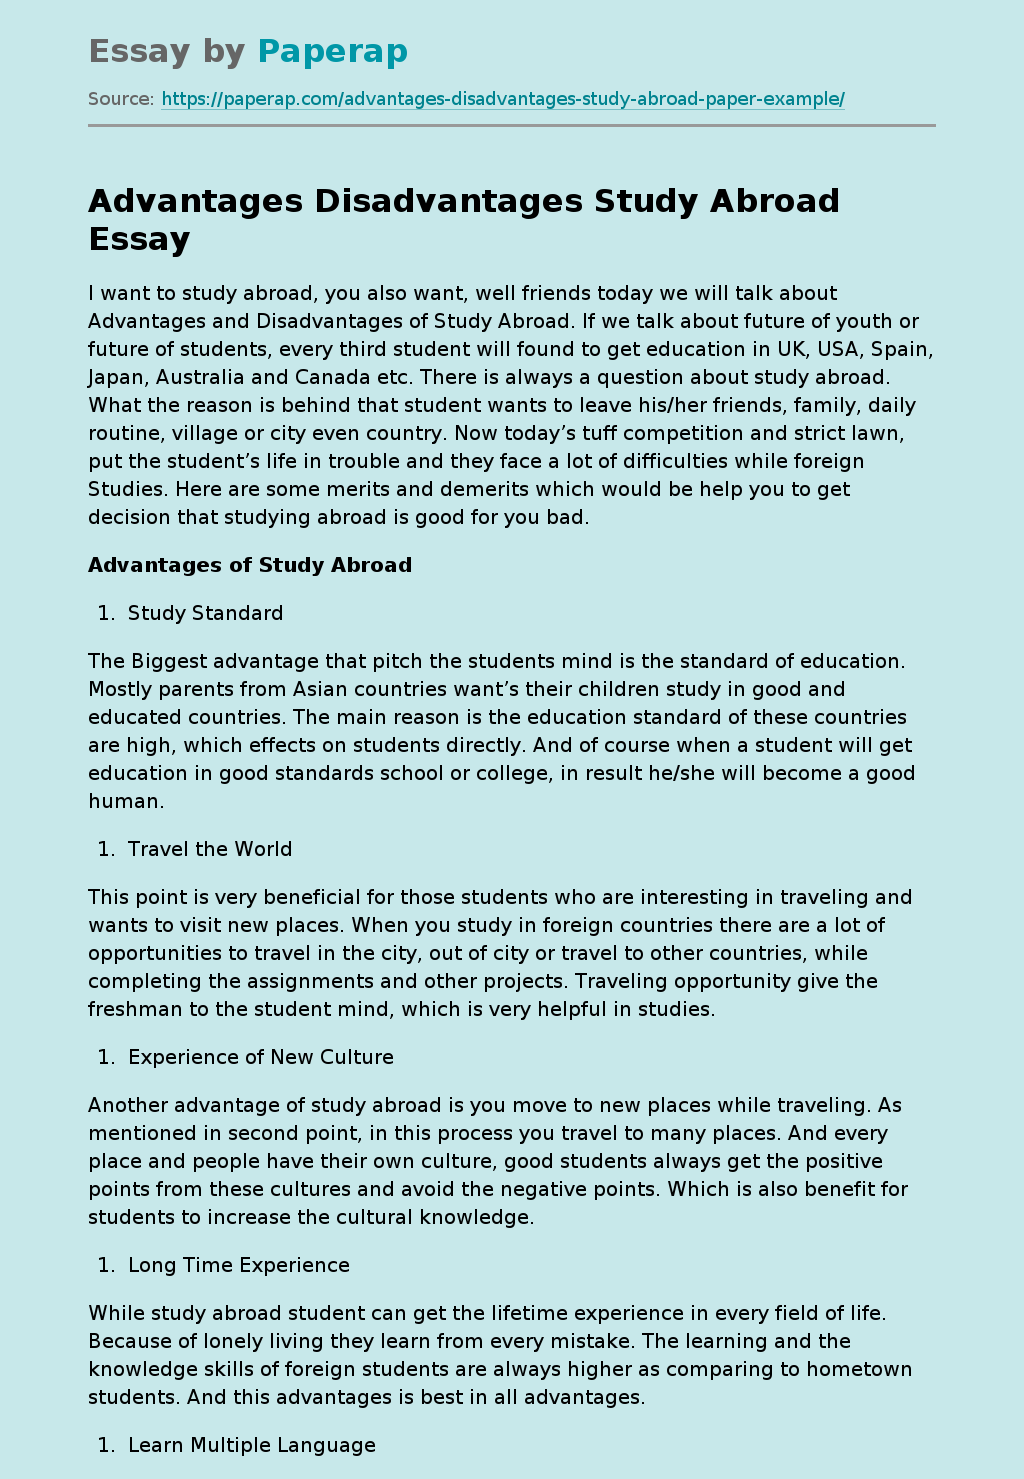 what are the disadvantages of studying abroad essay